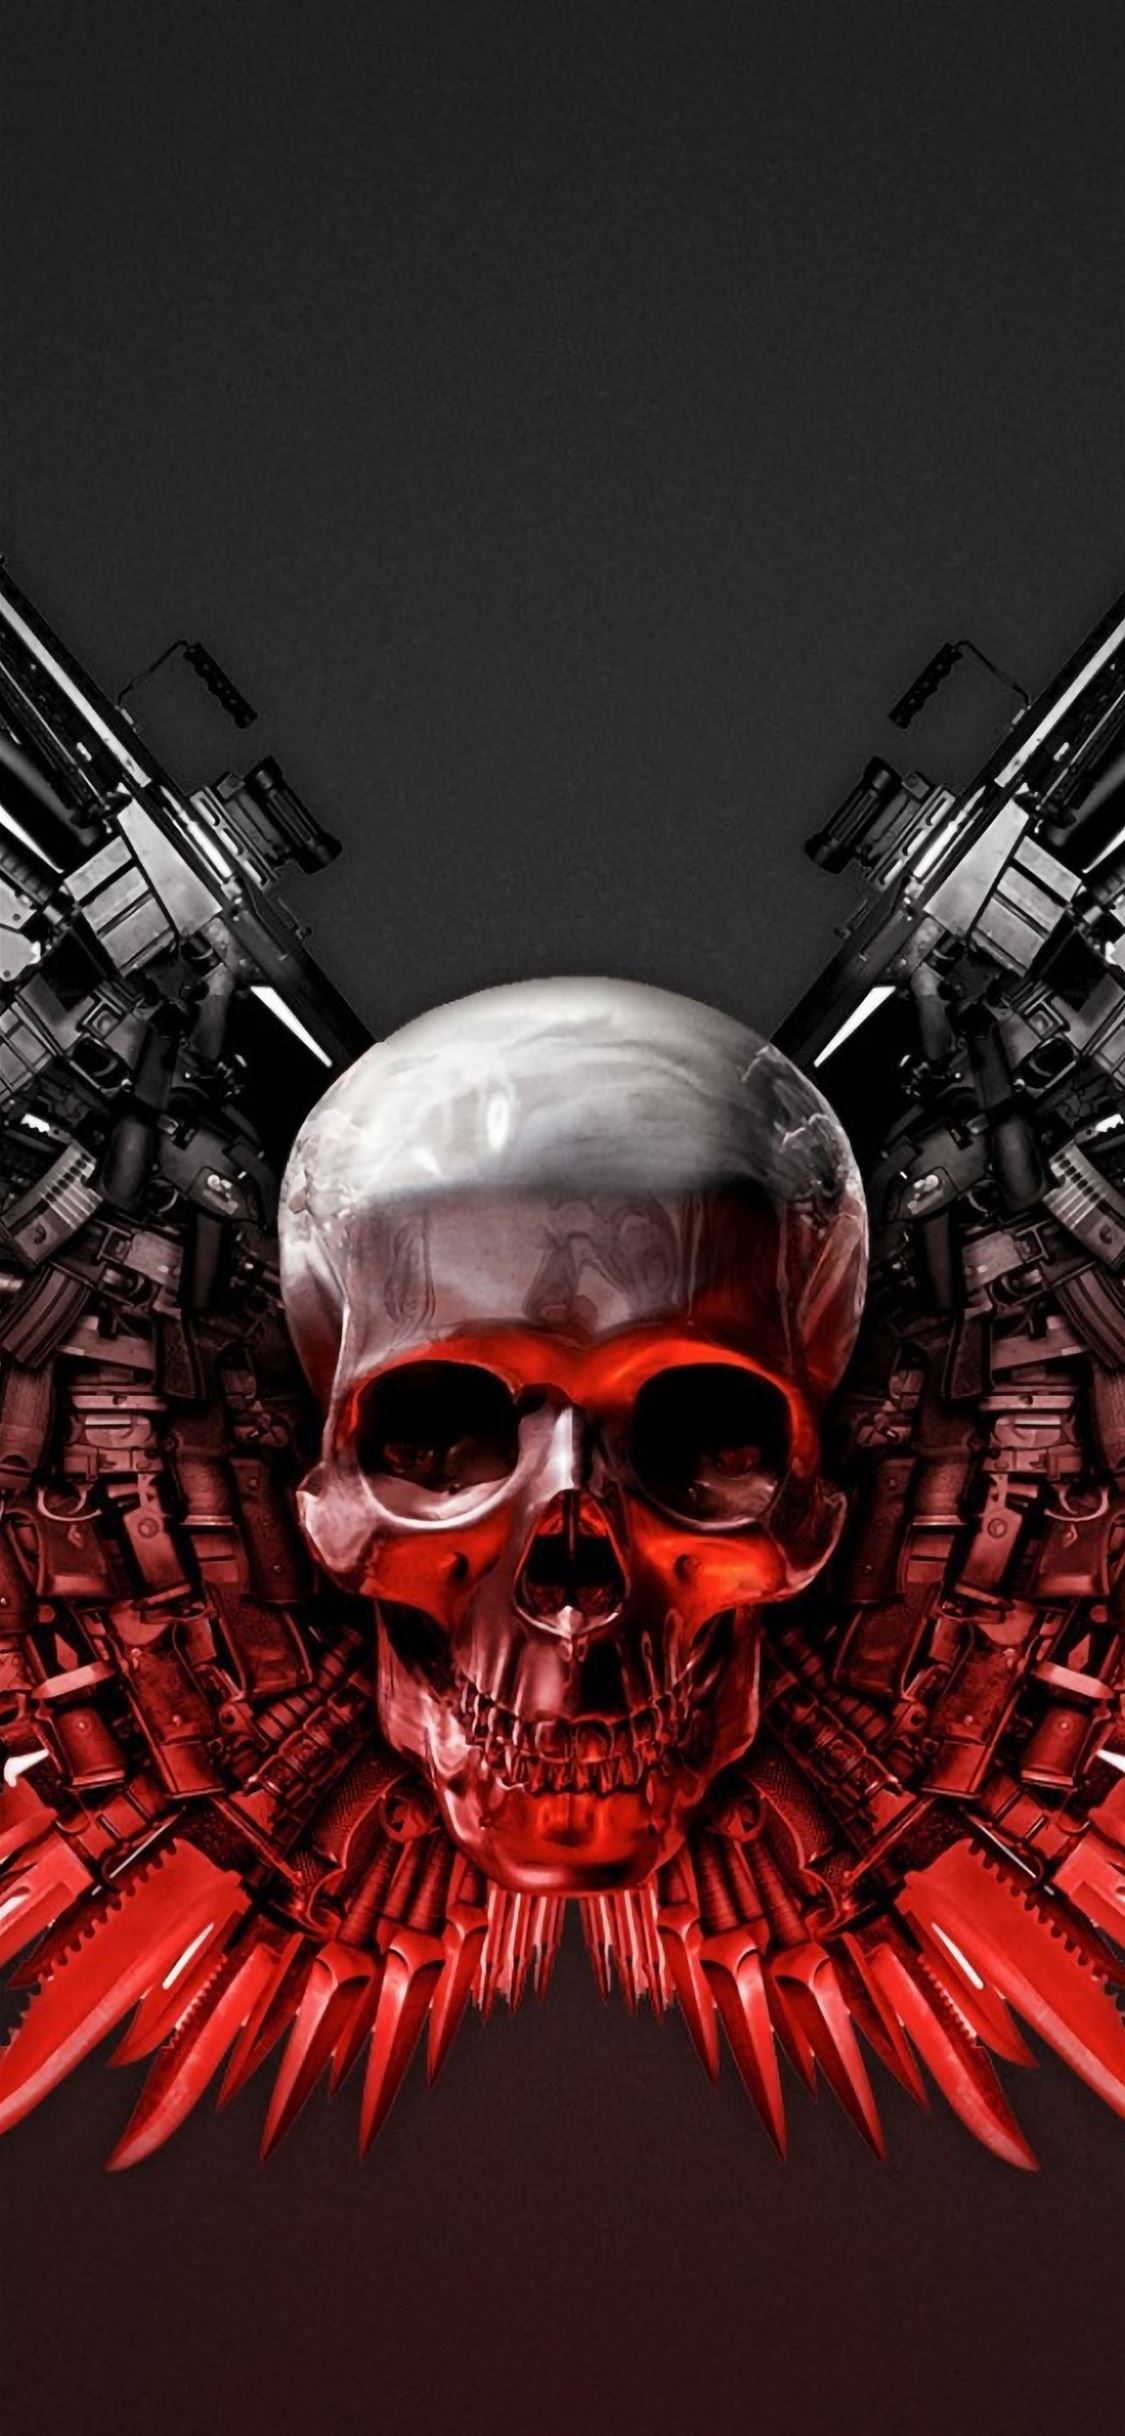 The Expendables Weapons Hd iPhone wallpaper 